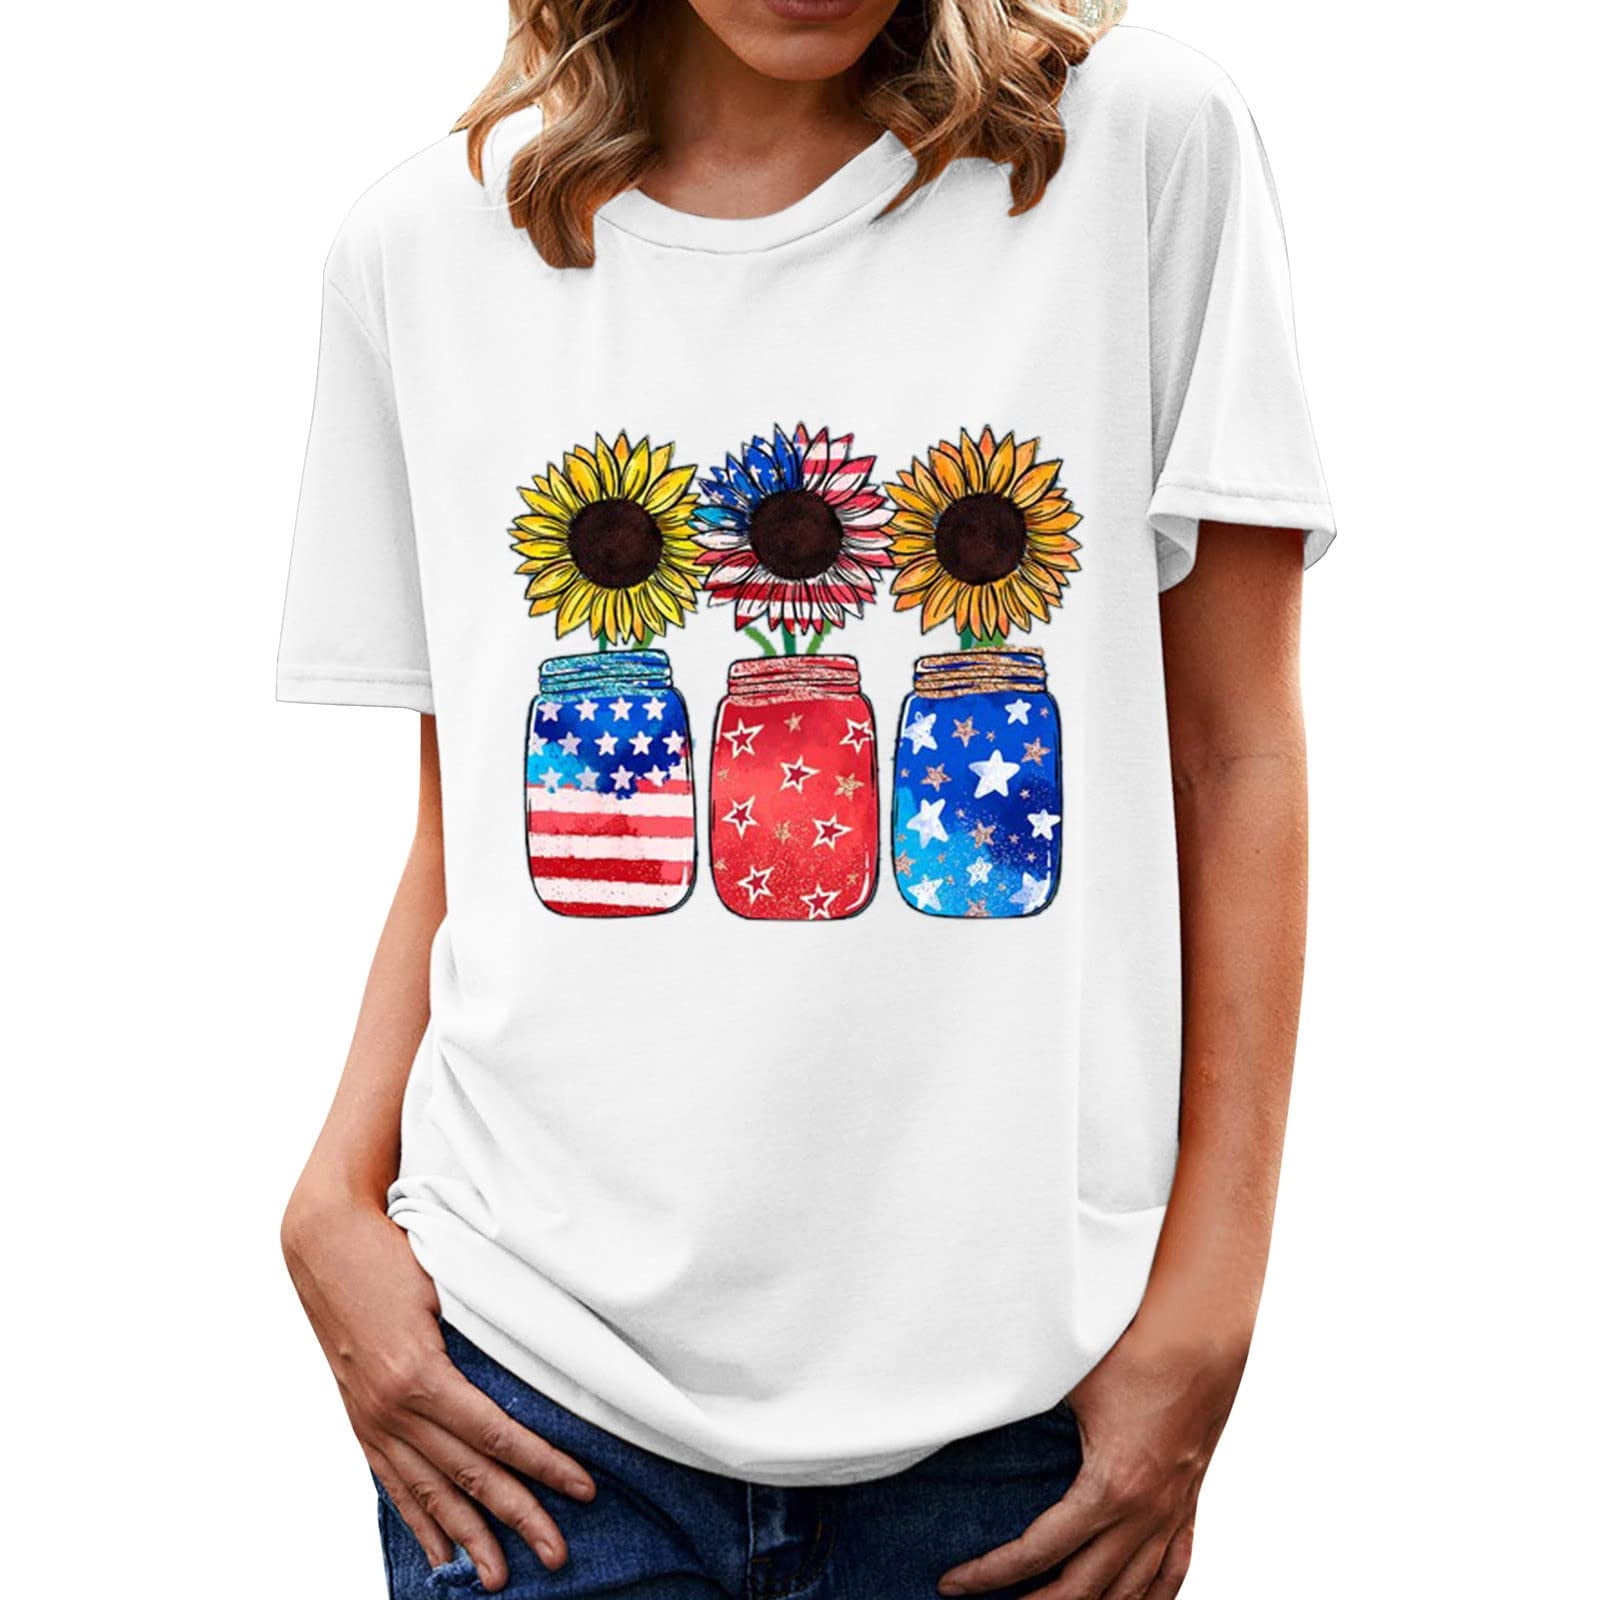 4th of July Womens Tops Summer Casual Crewneck Short Sleeve Plus Size Shirt Sunflower Graphic Tees Memorial Day Blouse 